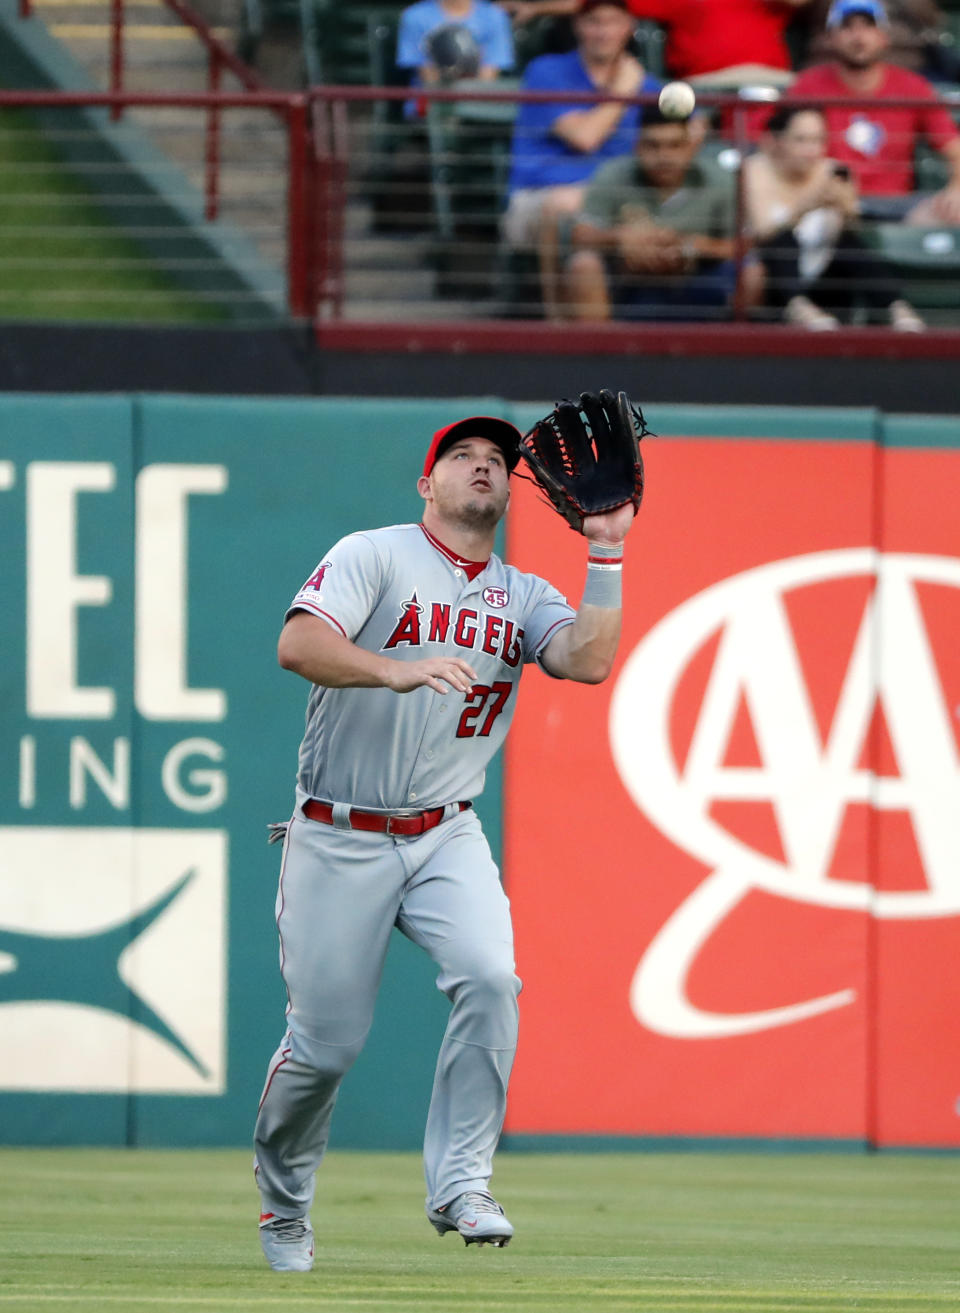 Los Angeles Angels center fielder Mike Trout reaches up to field a fly out by Texas Rangers' Elvis Andrus in the first inning of a baseball game in Arlington, Texas, Tuesday, Aug. 20, 2019. (AP Photo/Tony Gutierrez)